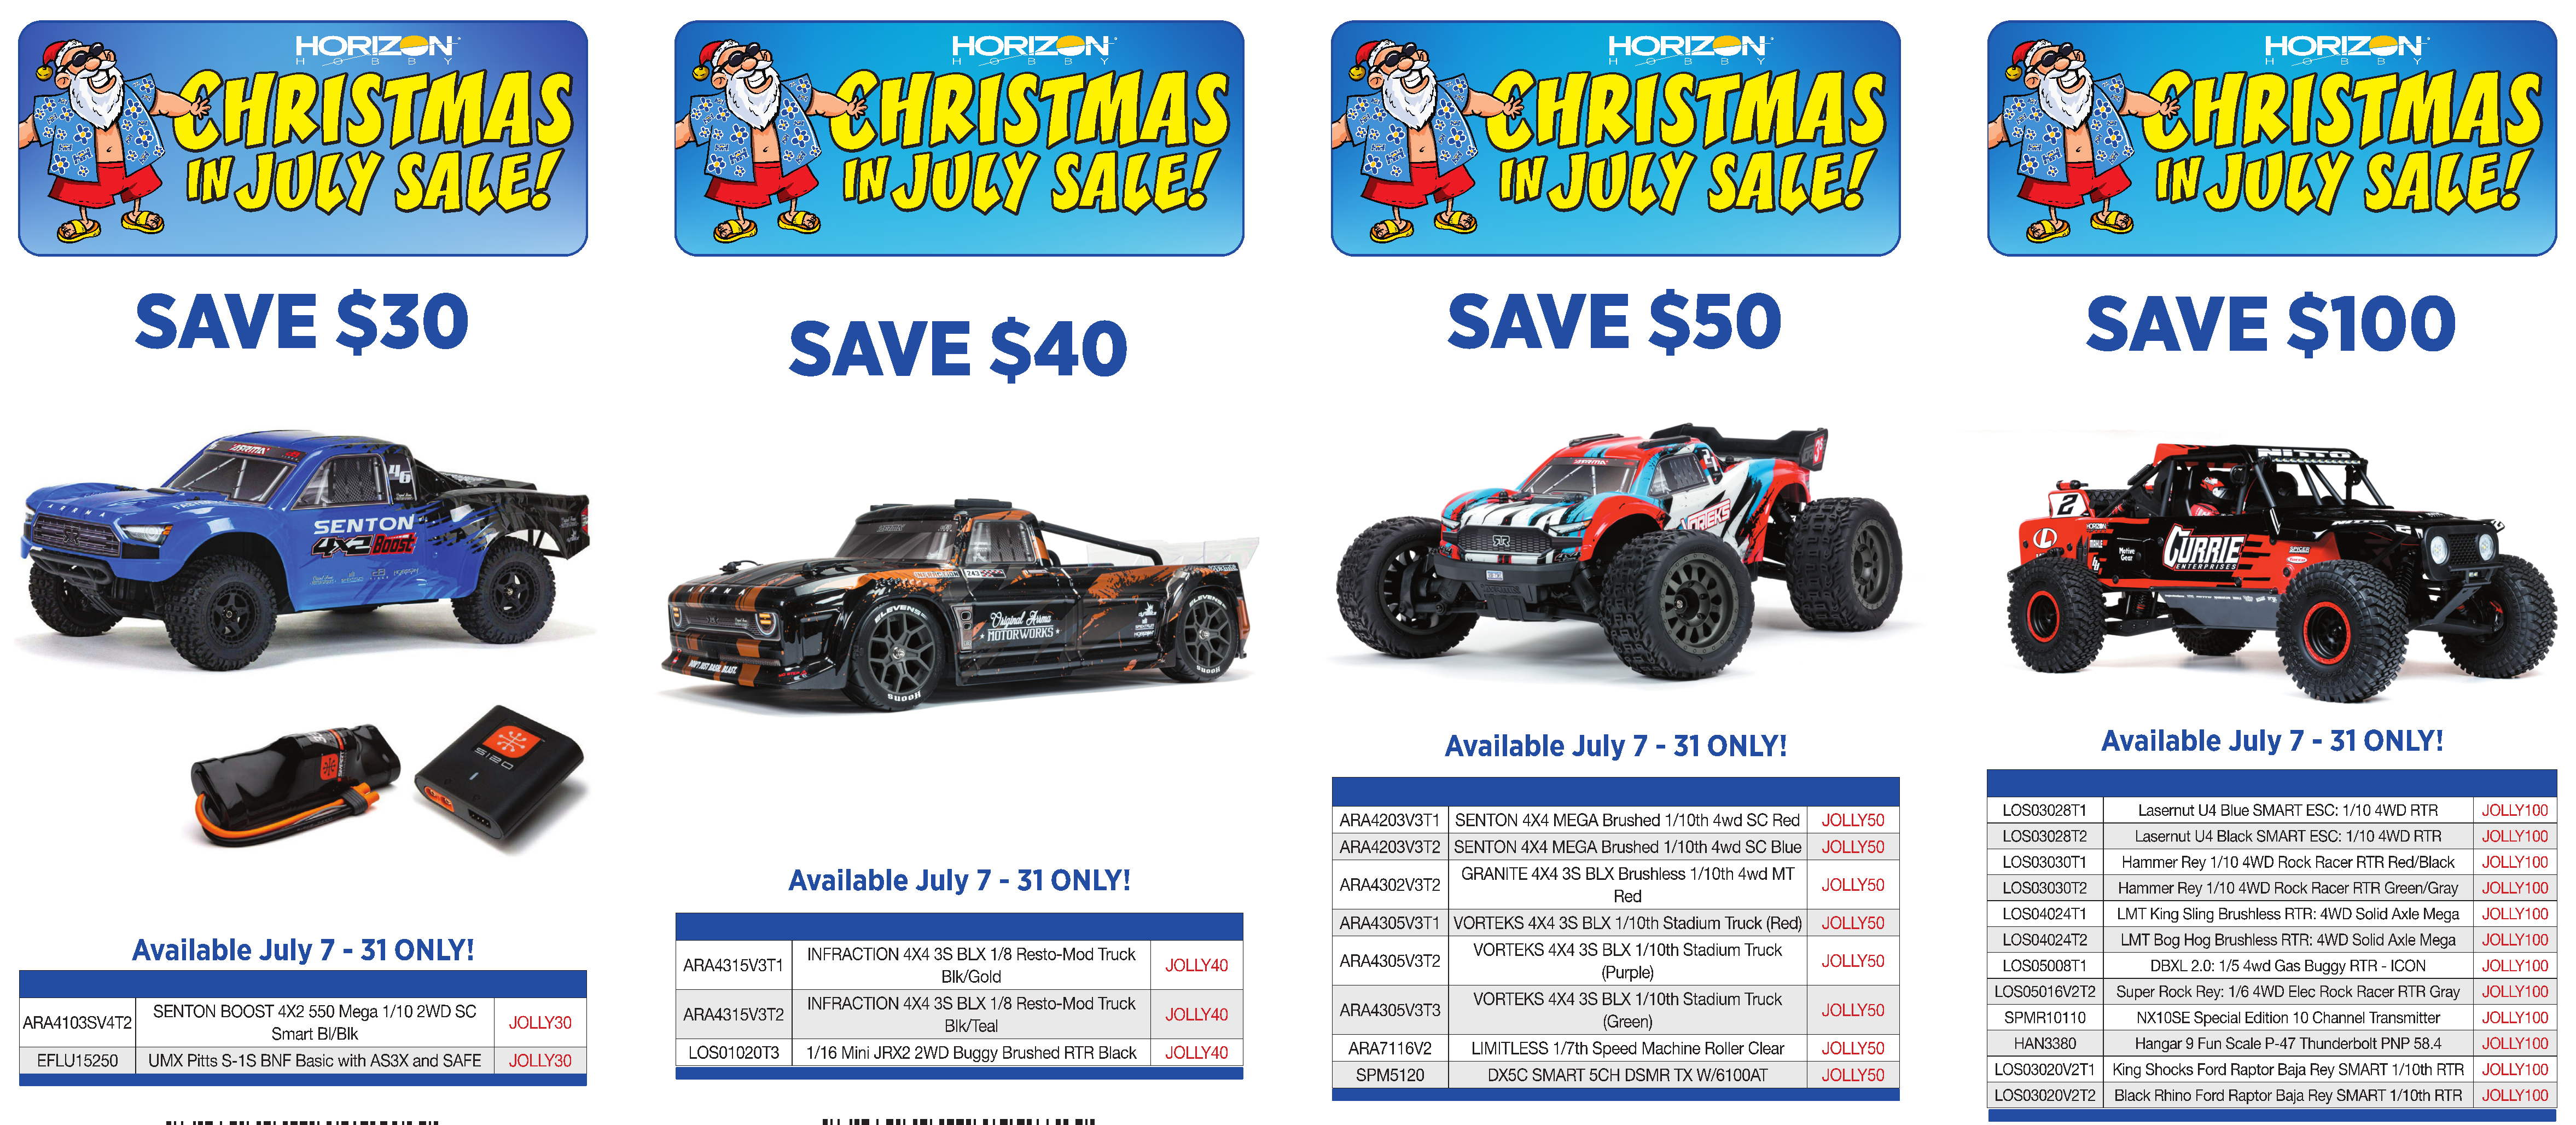 Xmas-in-July-Coupons image